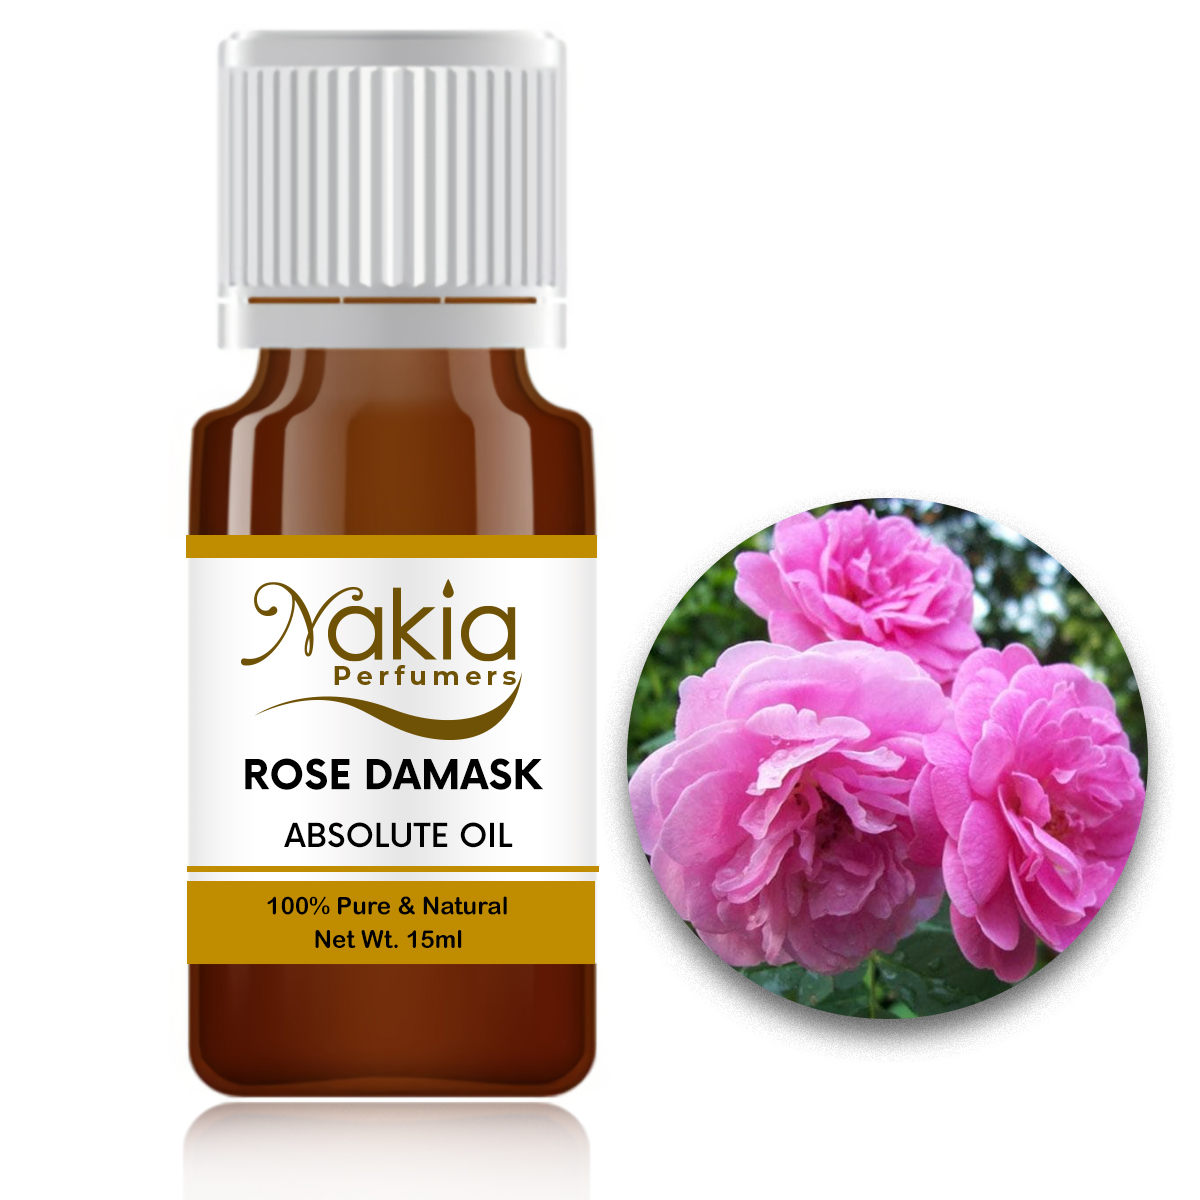 ROSE-DAMASK ABSOLUTE OIL